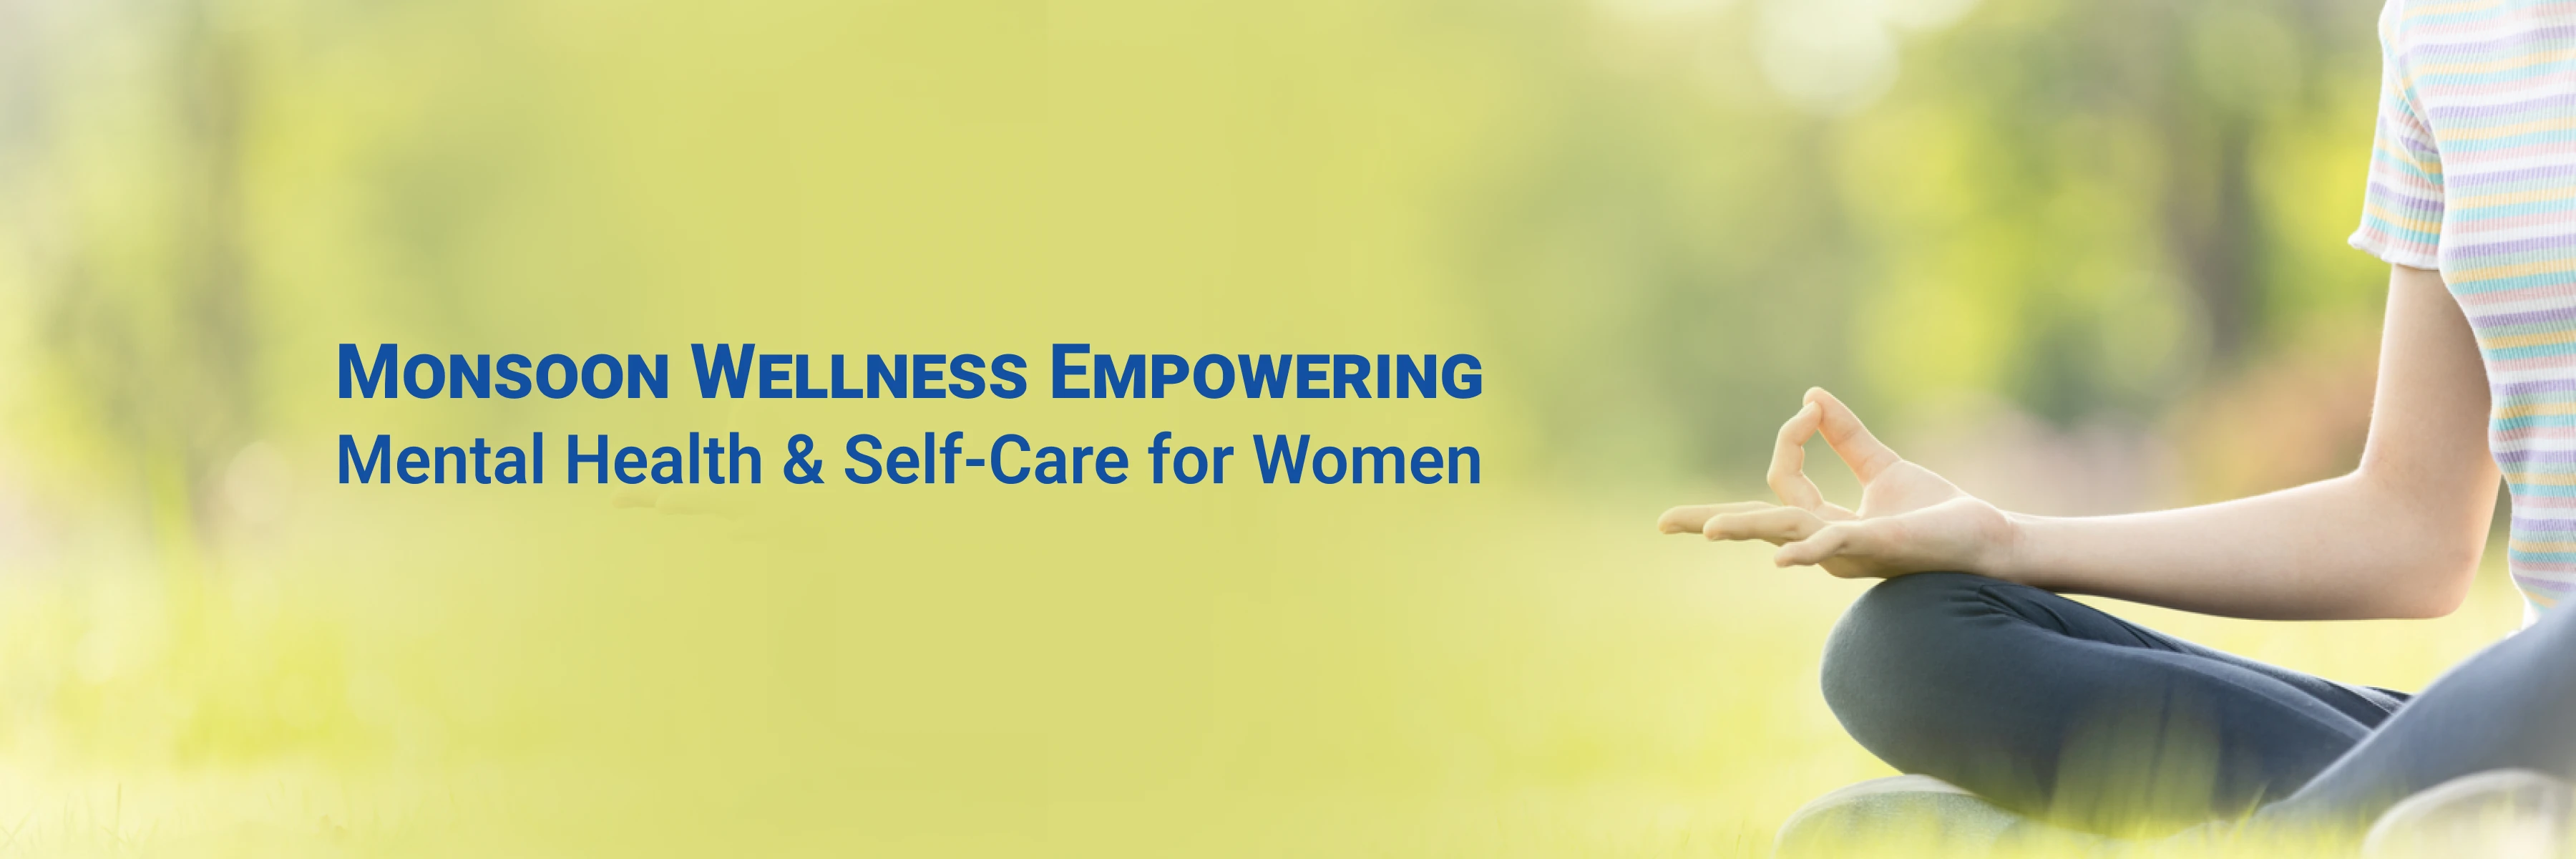 Monsoon Wellness Empowering Mental Health and Self-Care for Women